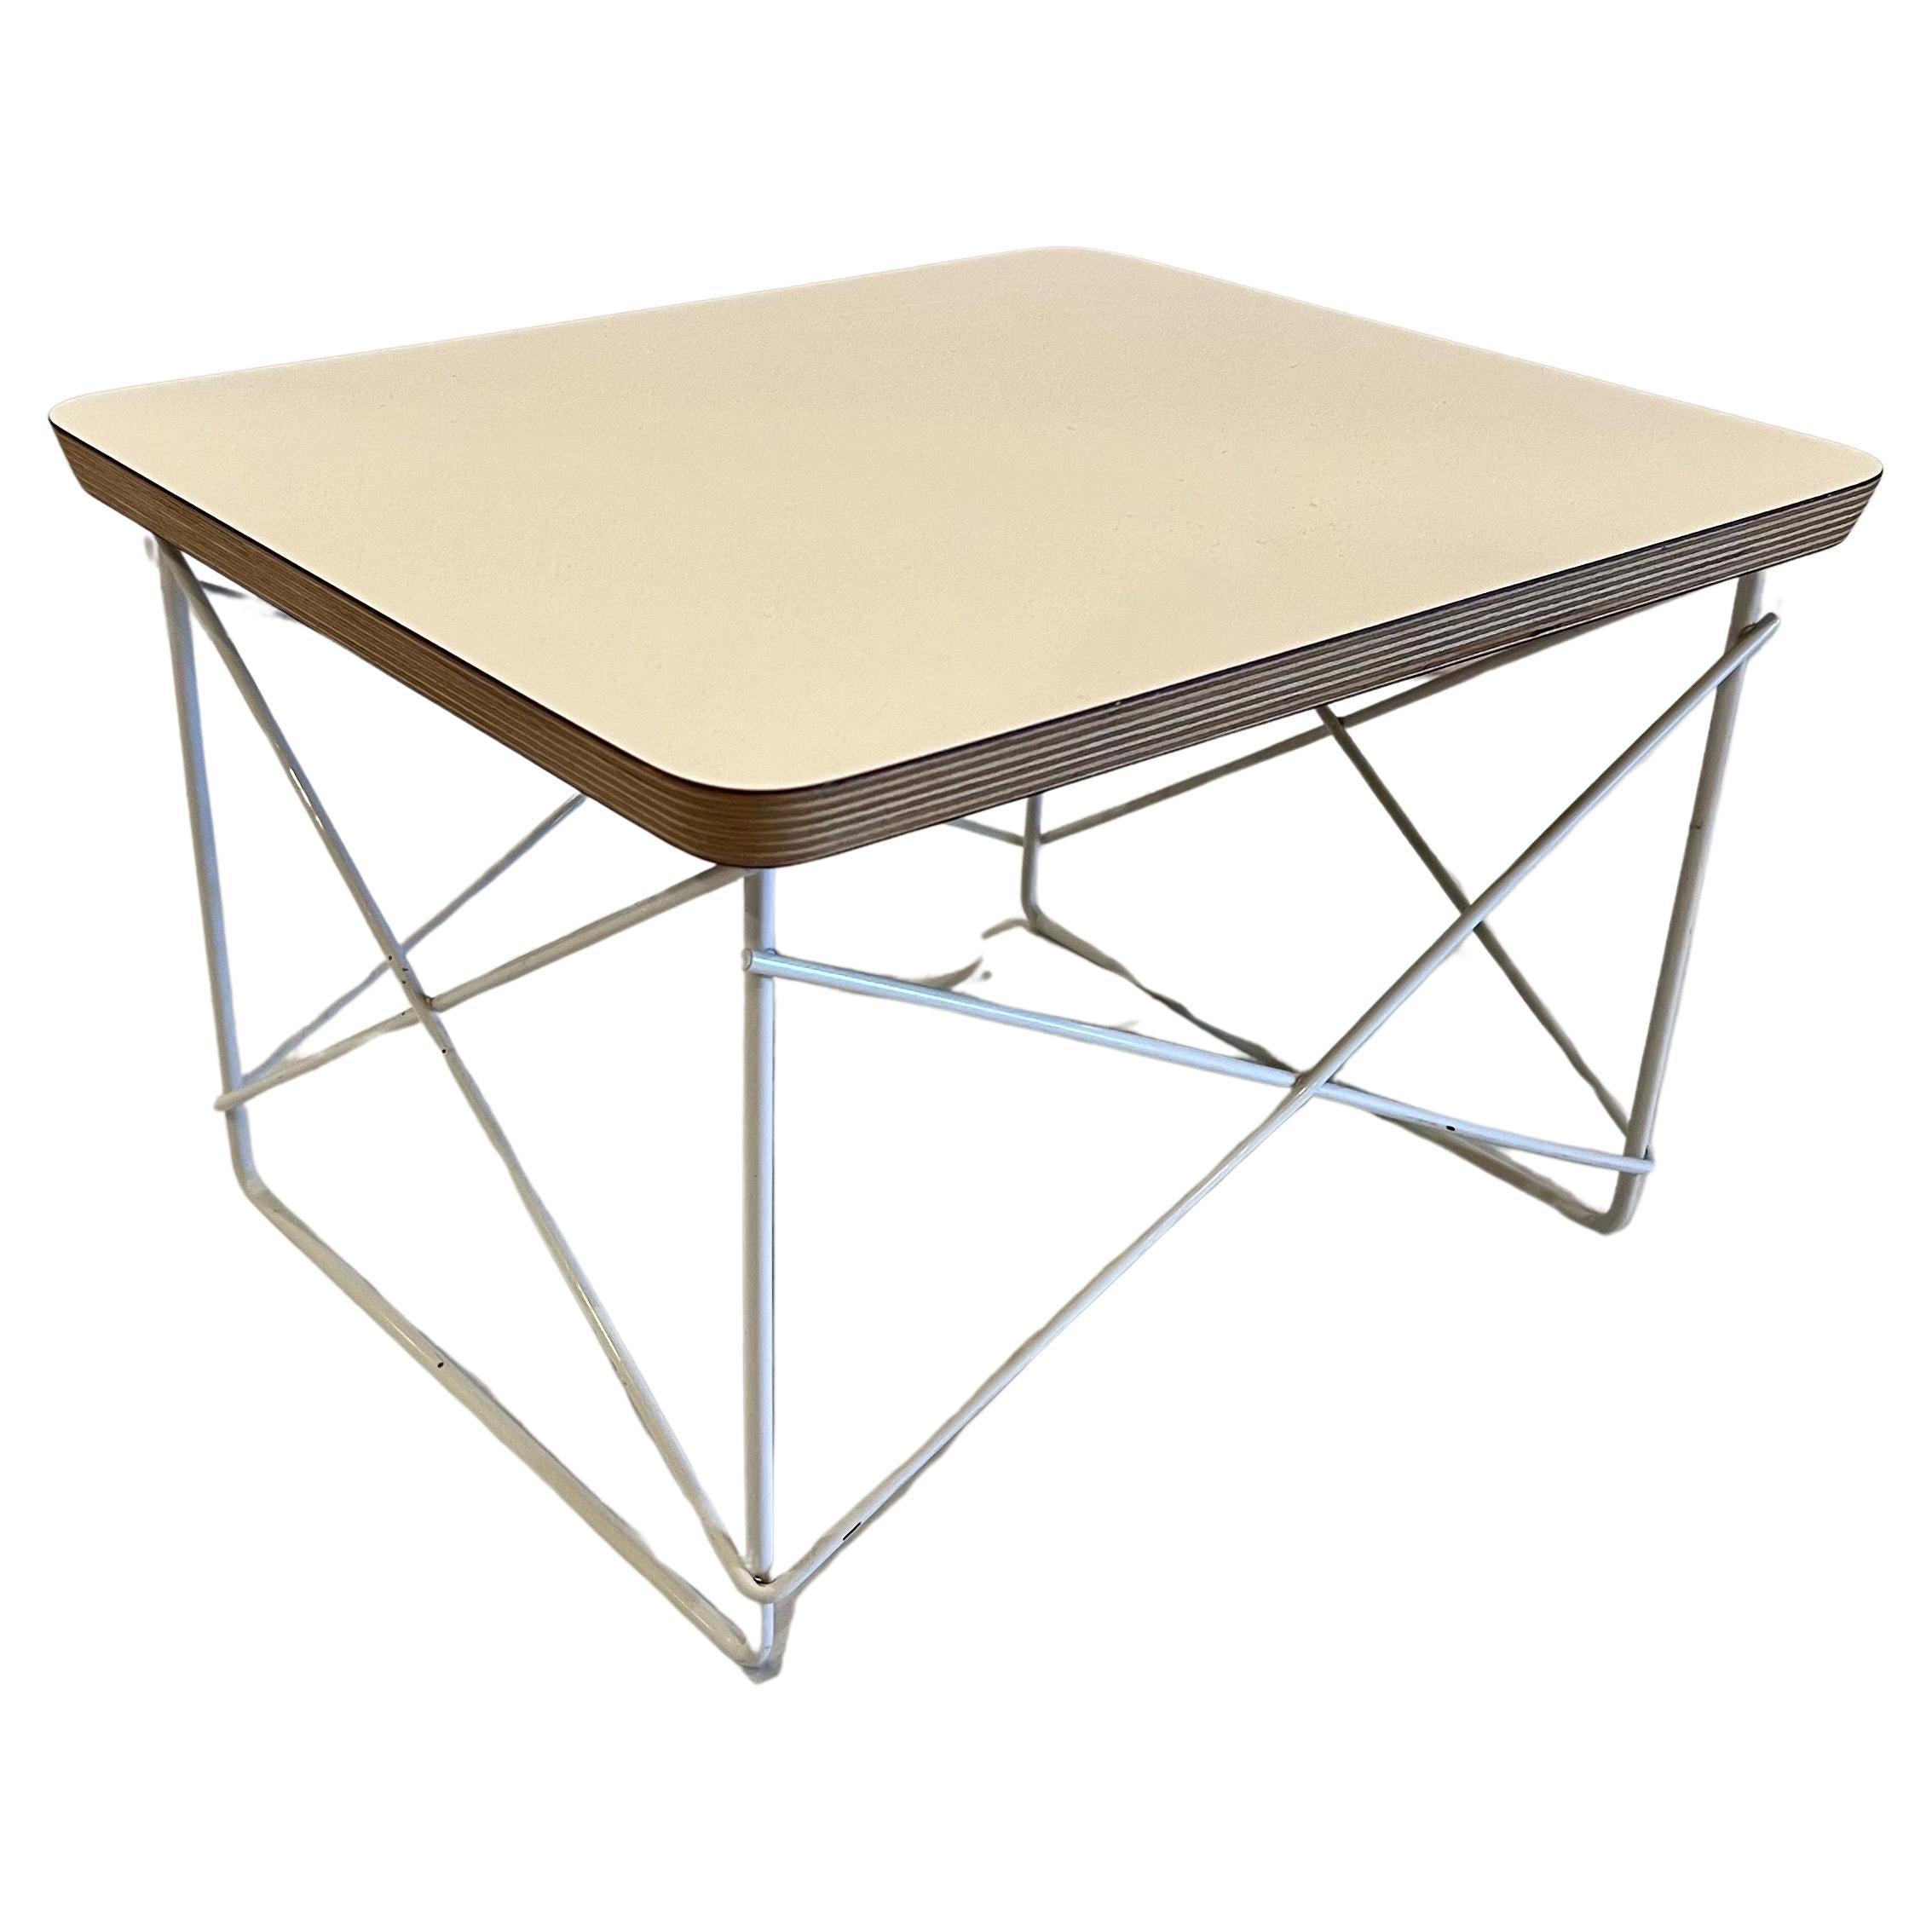 Iconic Mid Century Modern LTR Eames Ocassional Low Table by Herman Miller